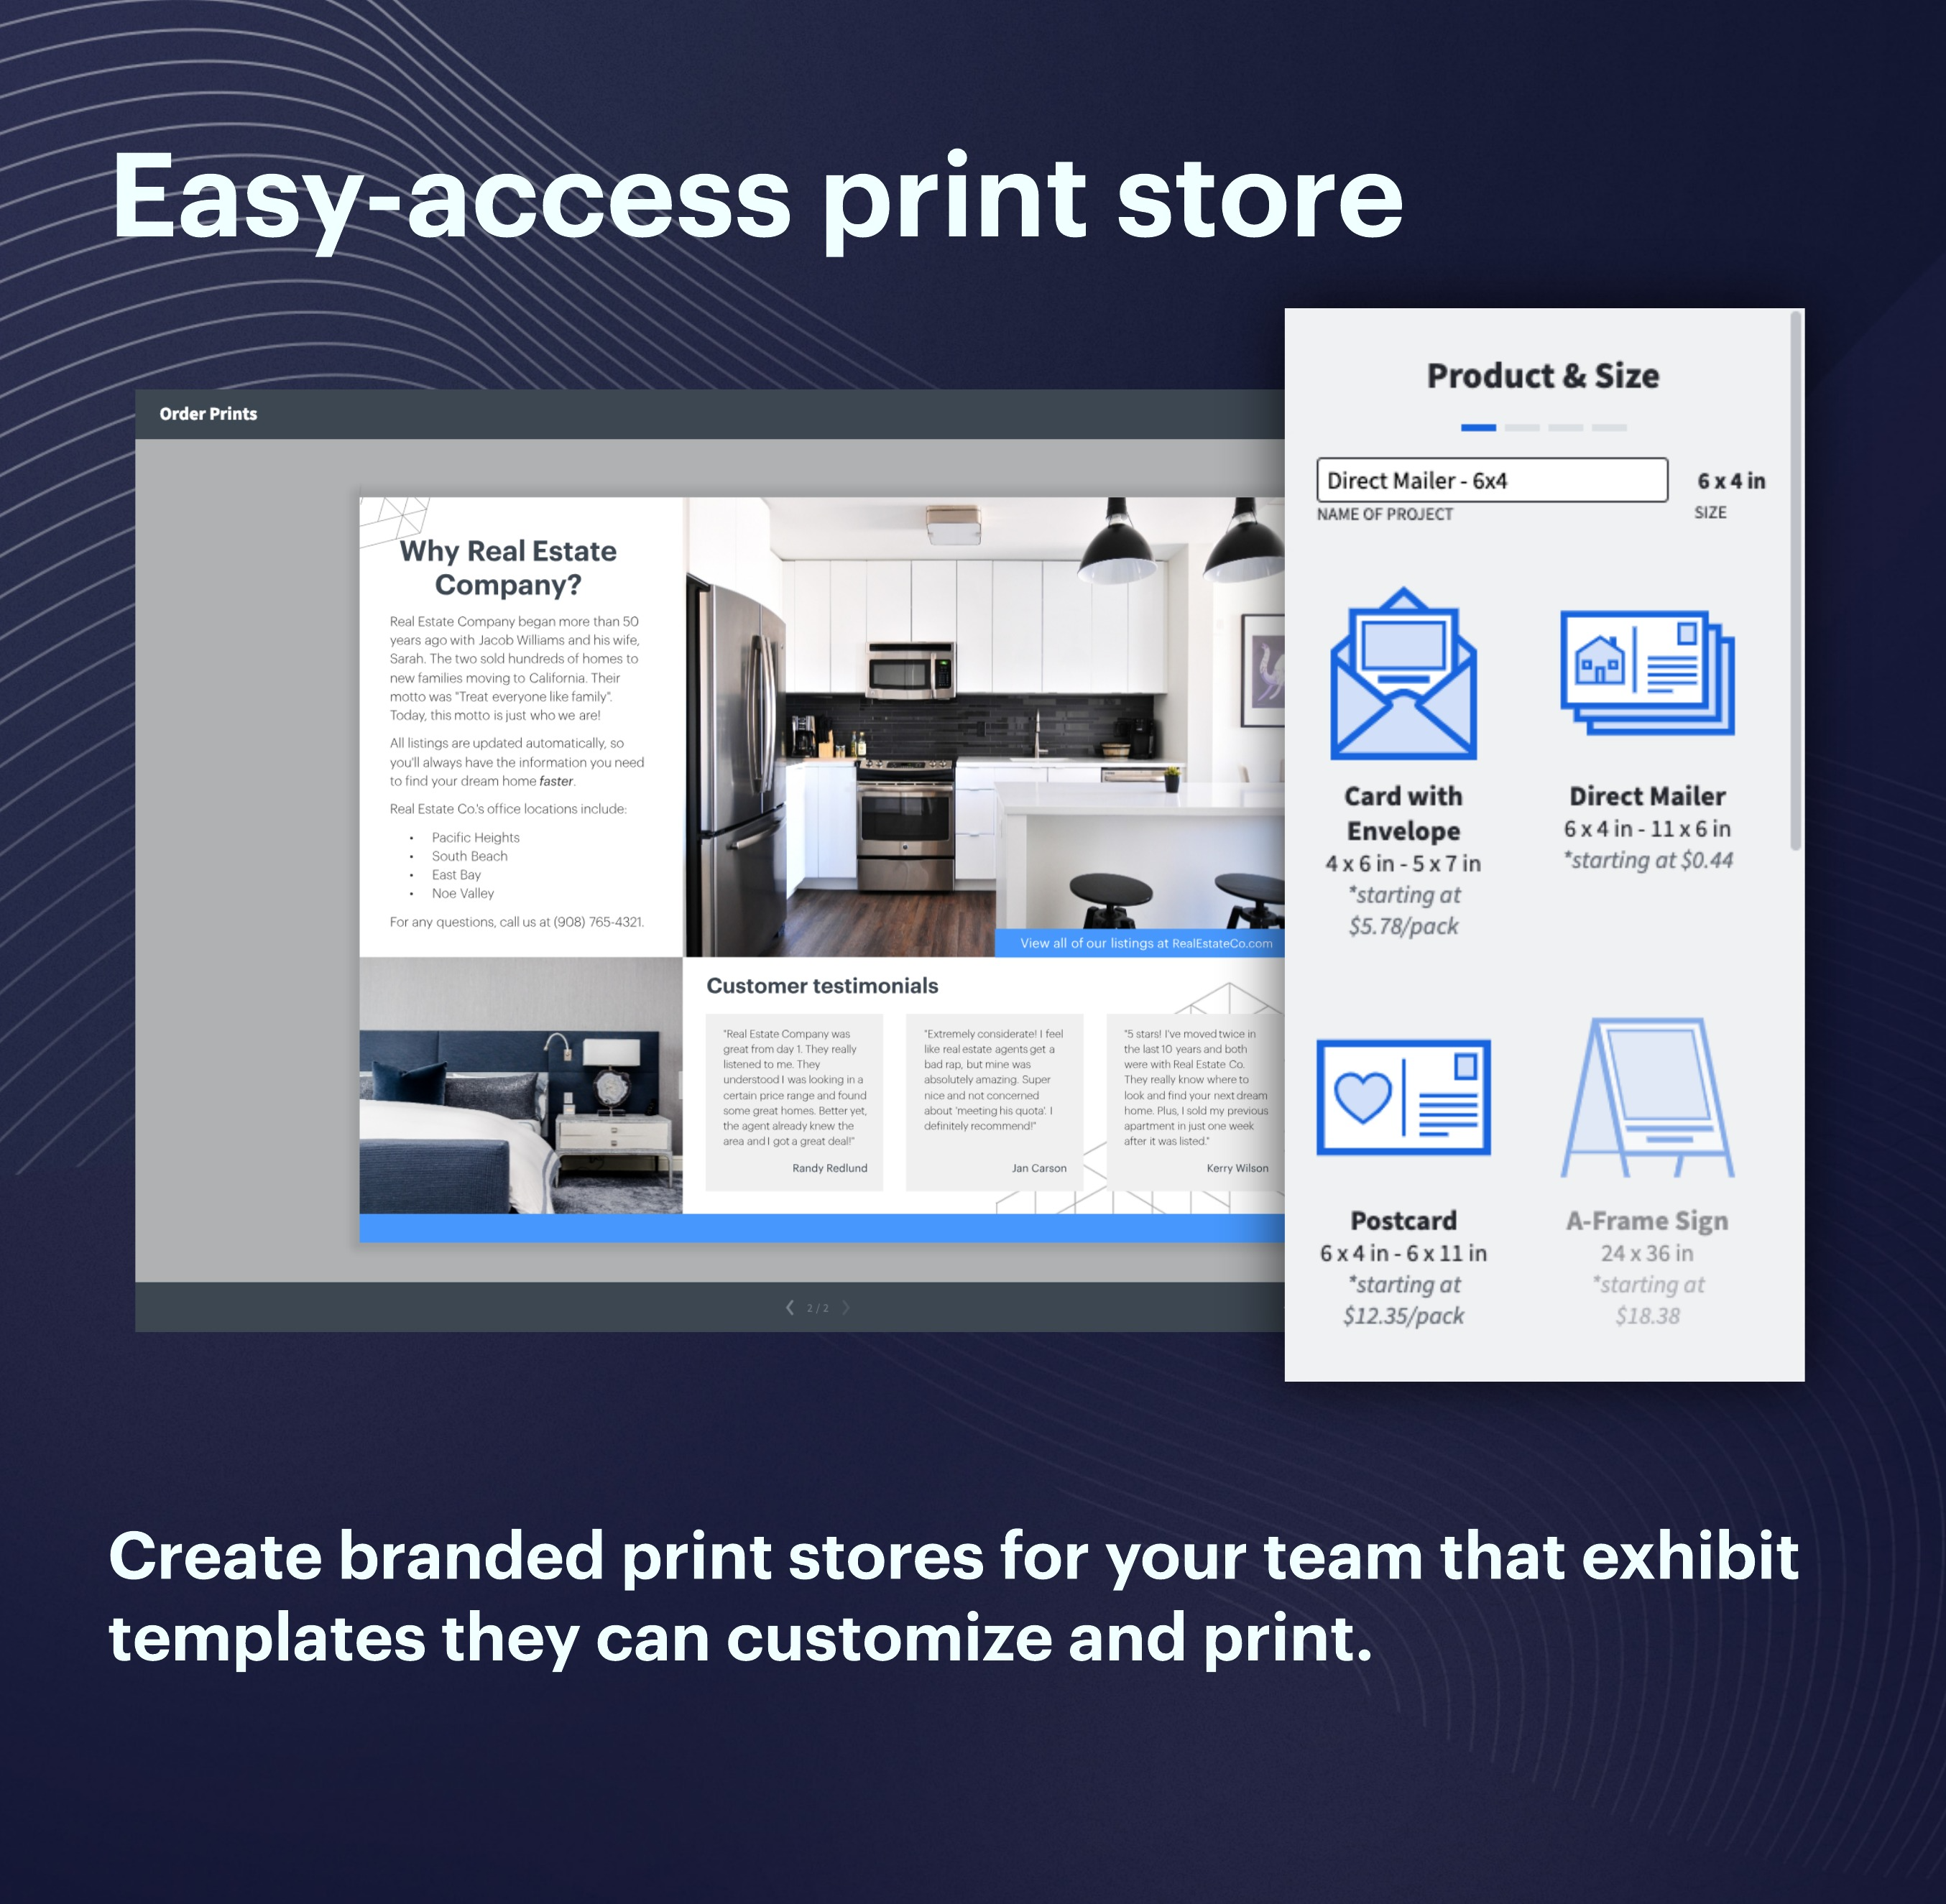 Lucidpress Software - Create branded print stores for your team and exhibit templates they can customize and print.